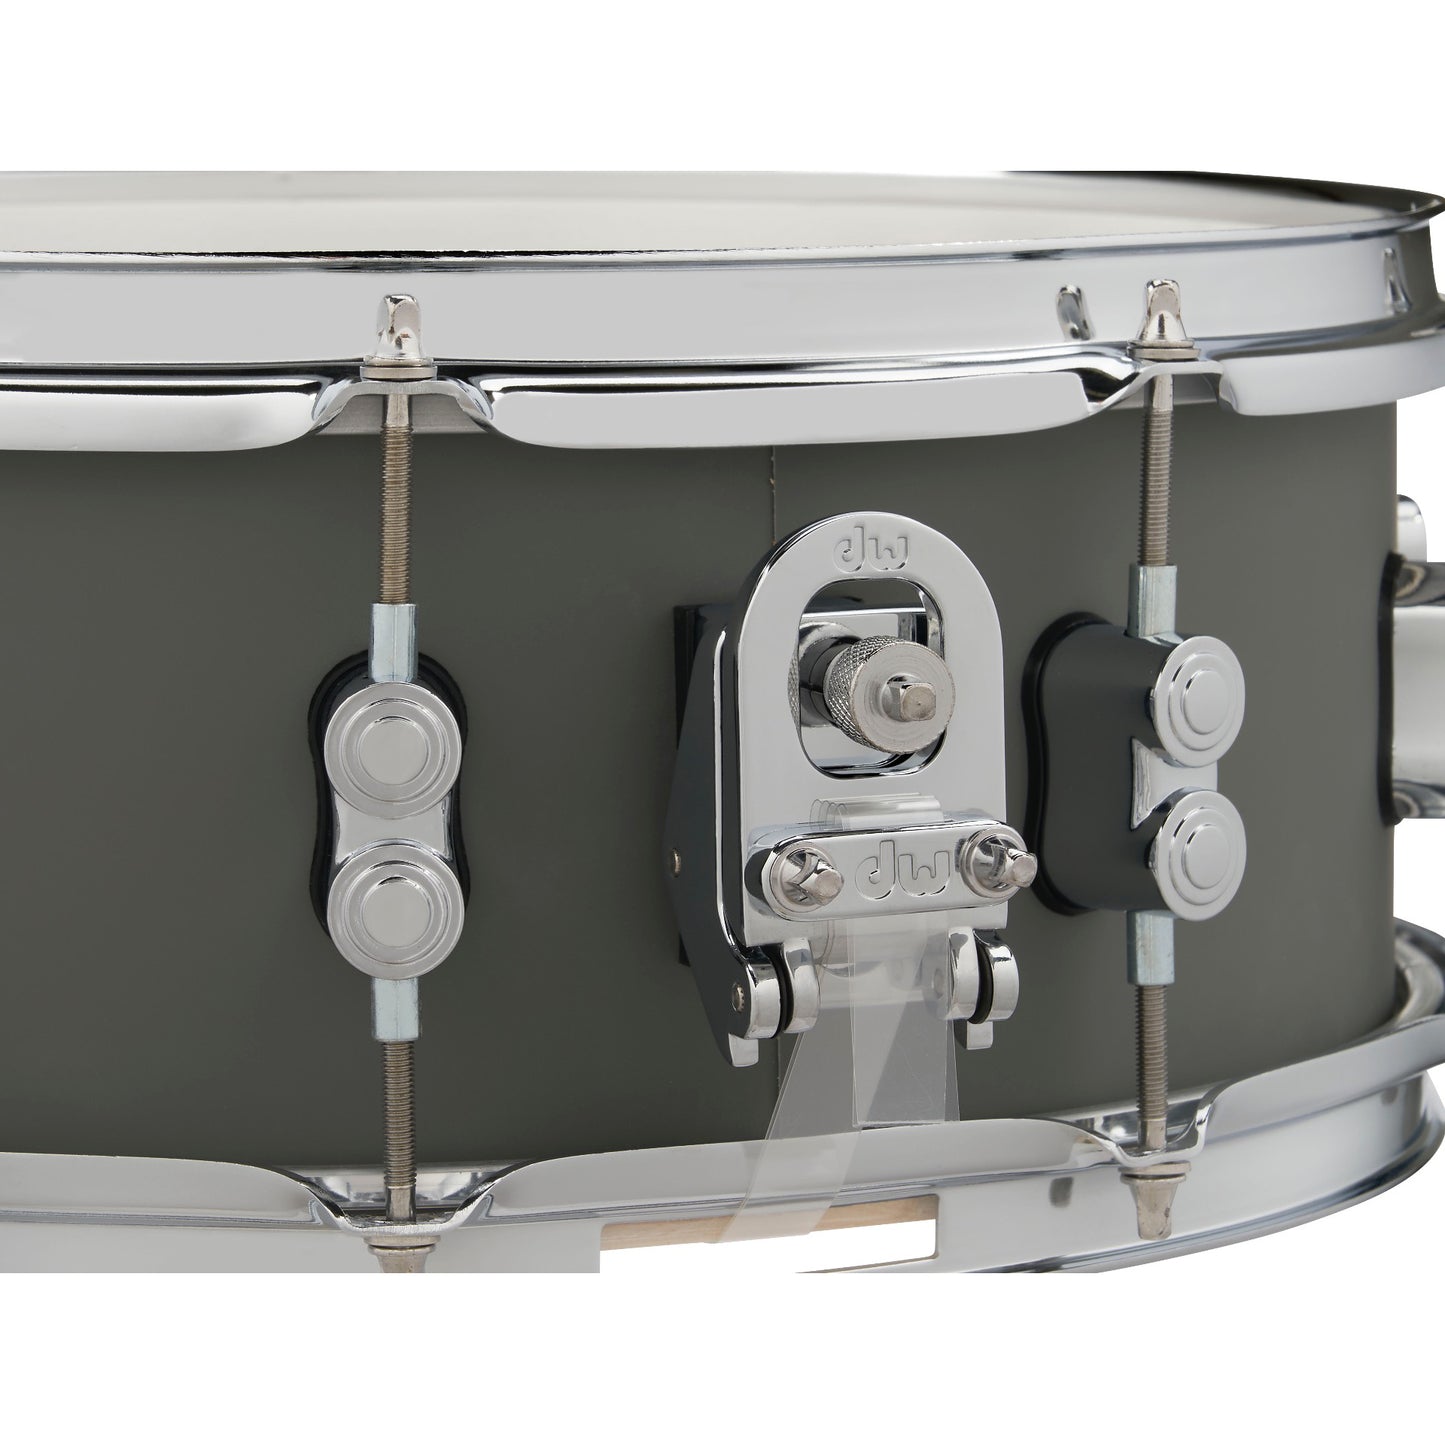 Pacific Drums & Percussion Concept Series 5.5x14 Snare Drum - Satin Pewter